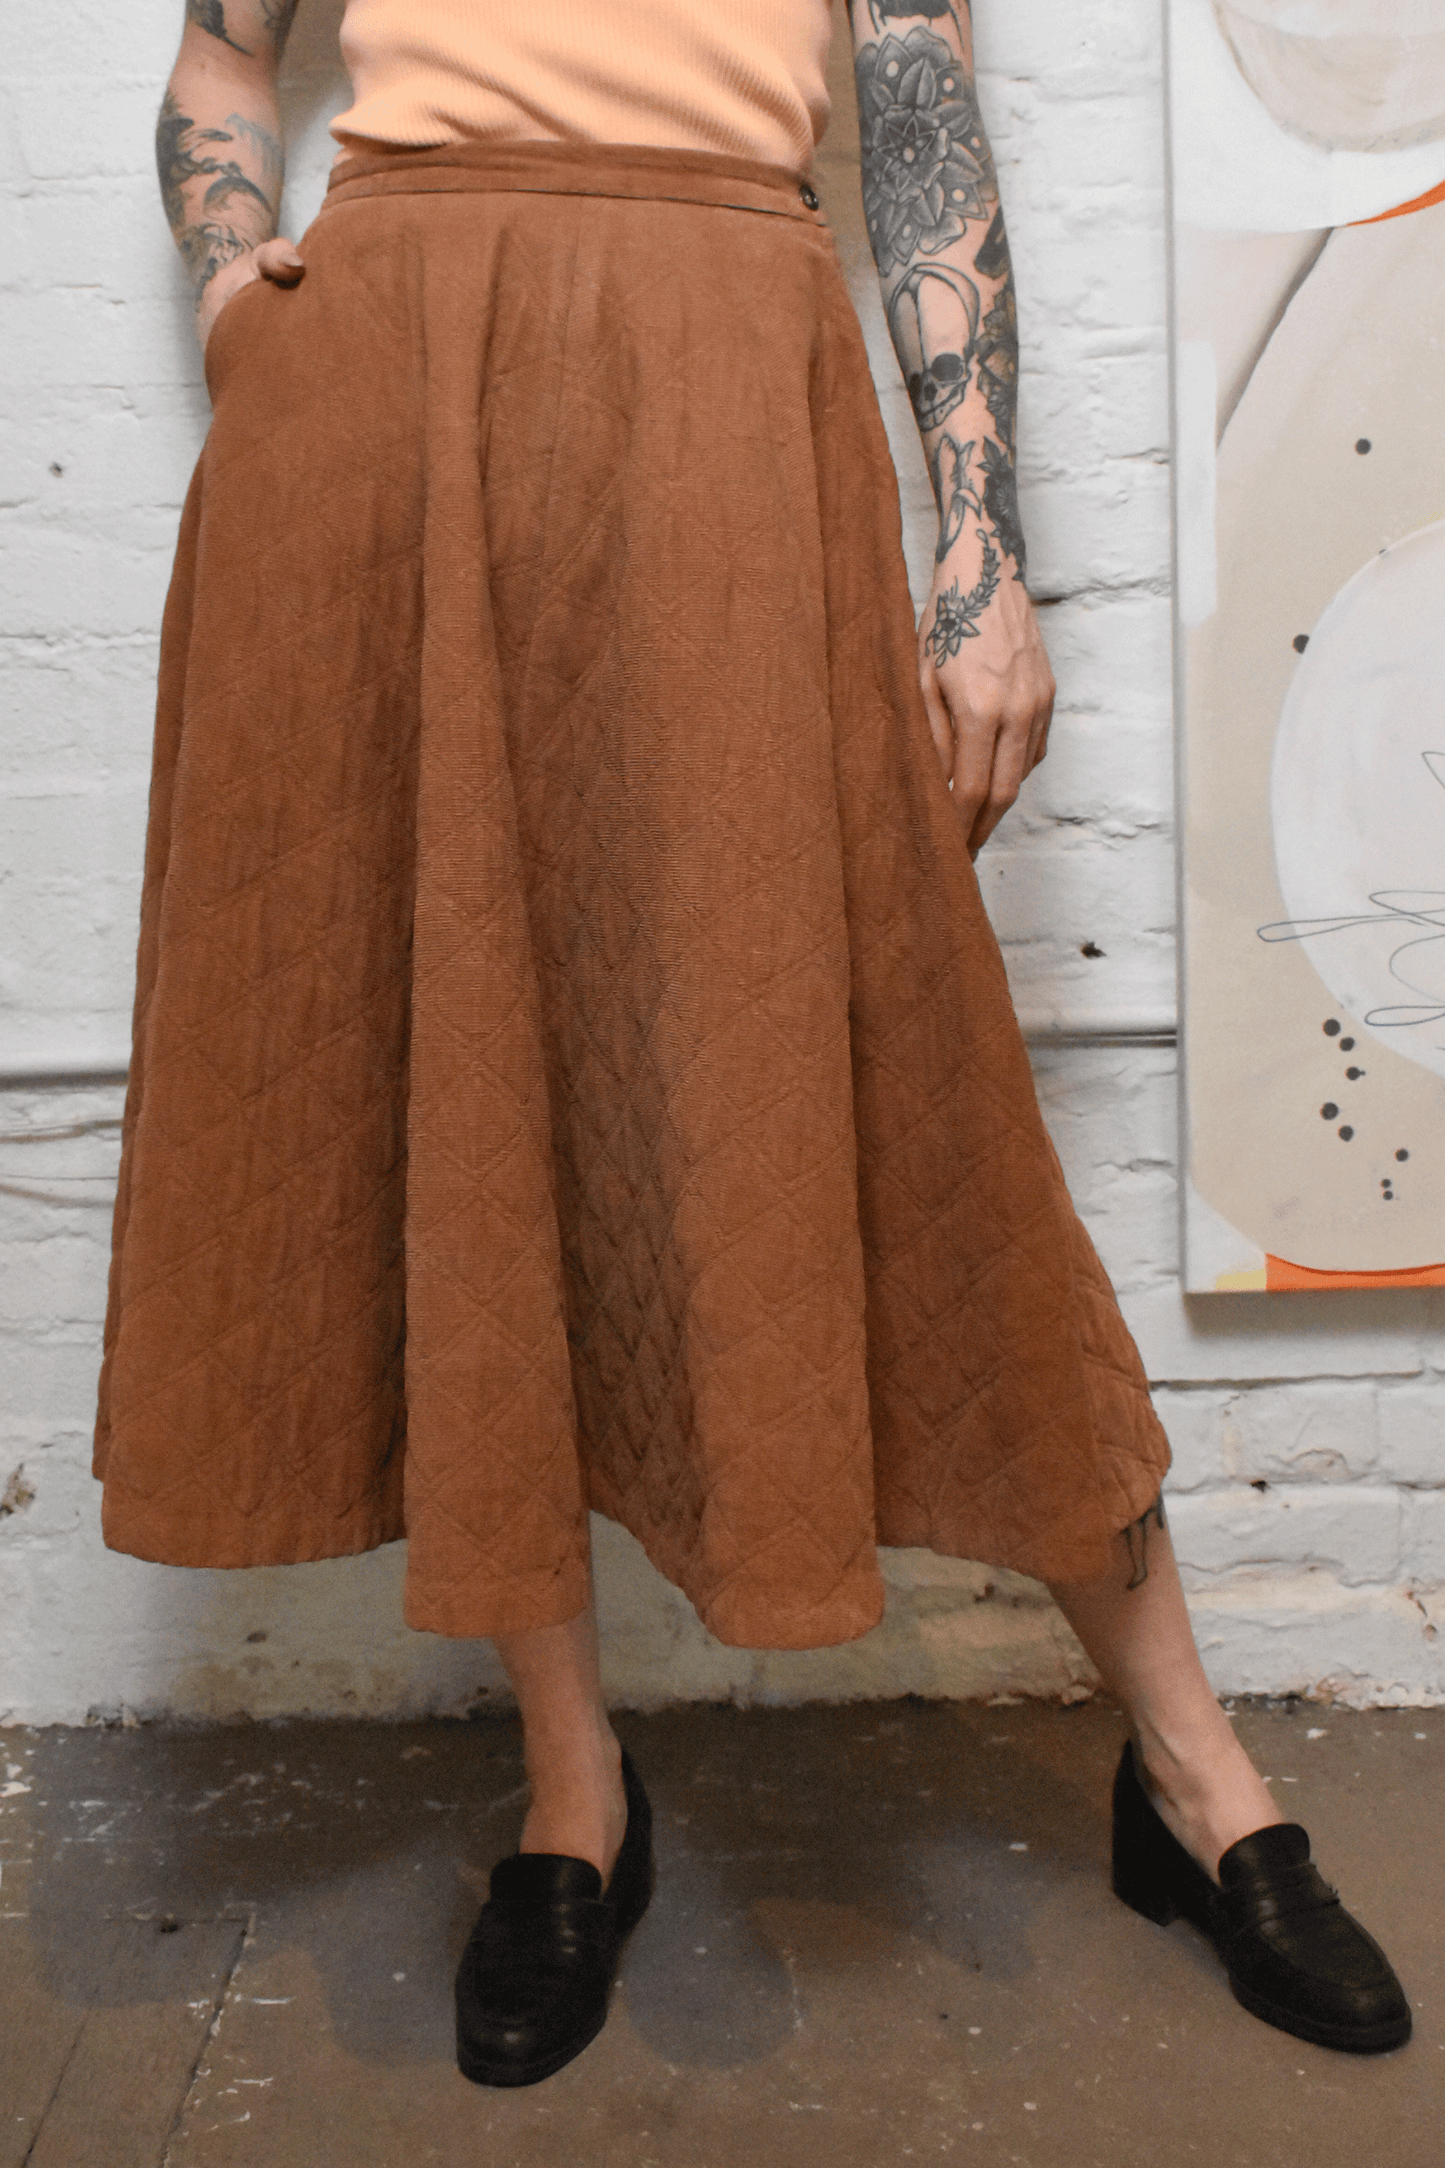 Vintage 1950s "Tailor Maid Sportswear by Kay- Dee" Caramel Quilted Skirt